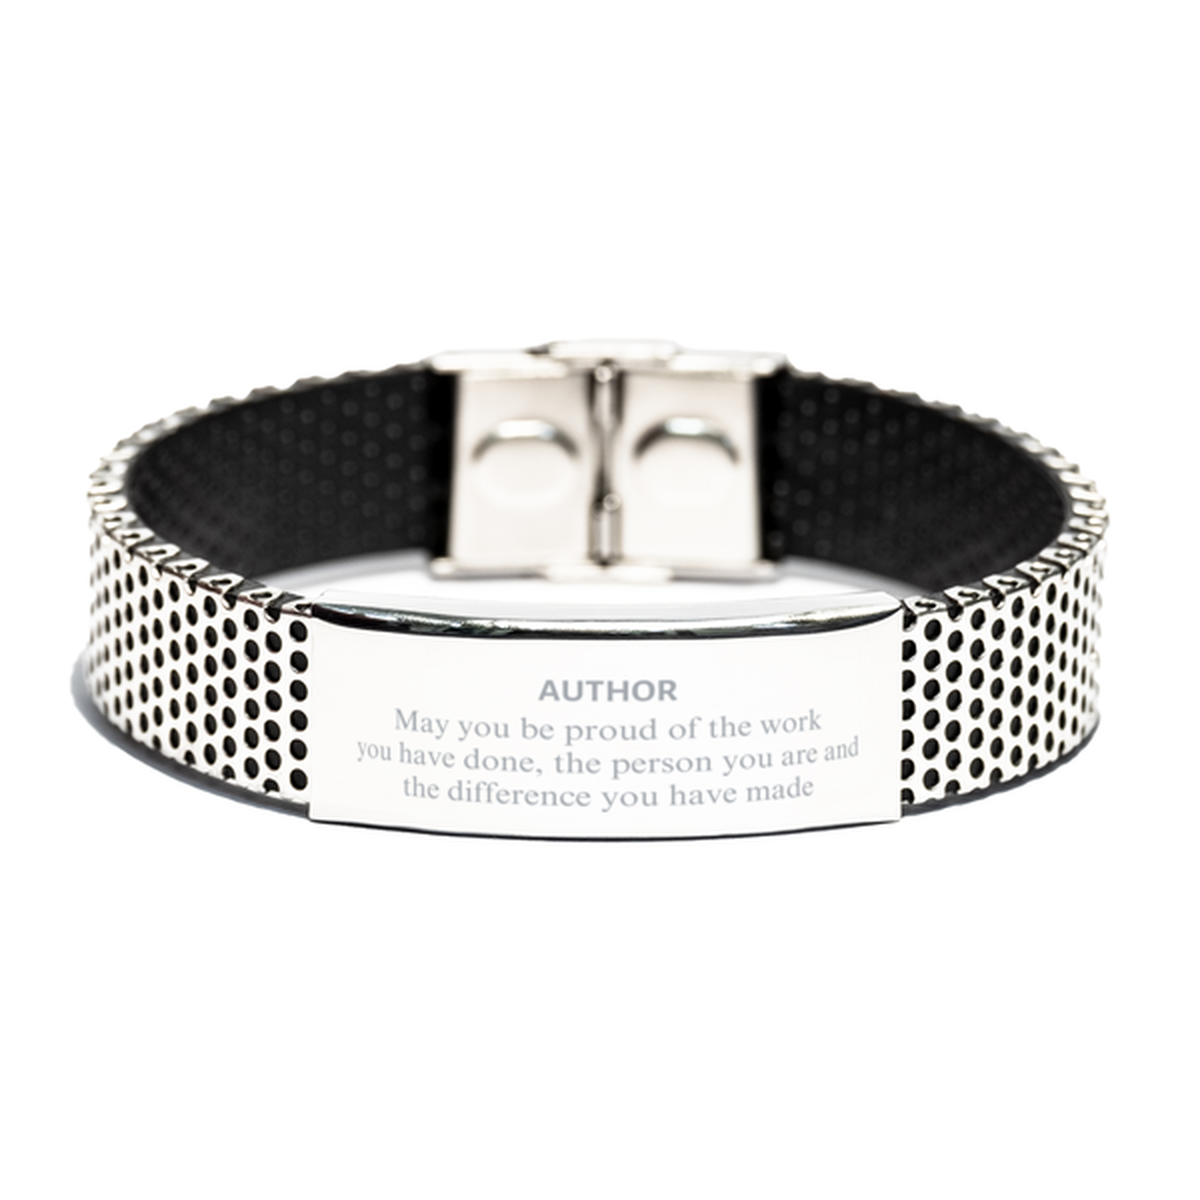 Author May you be proud of the work you have done, Retirement Author Stainless Steel Bracelet for Colleague Appreciation Gifts Amazing for Author